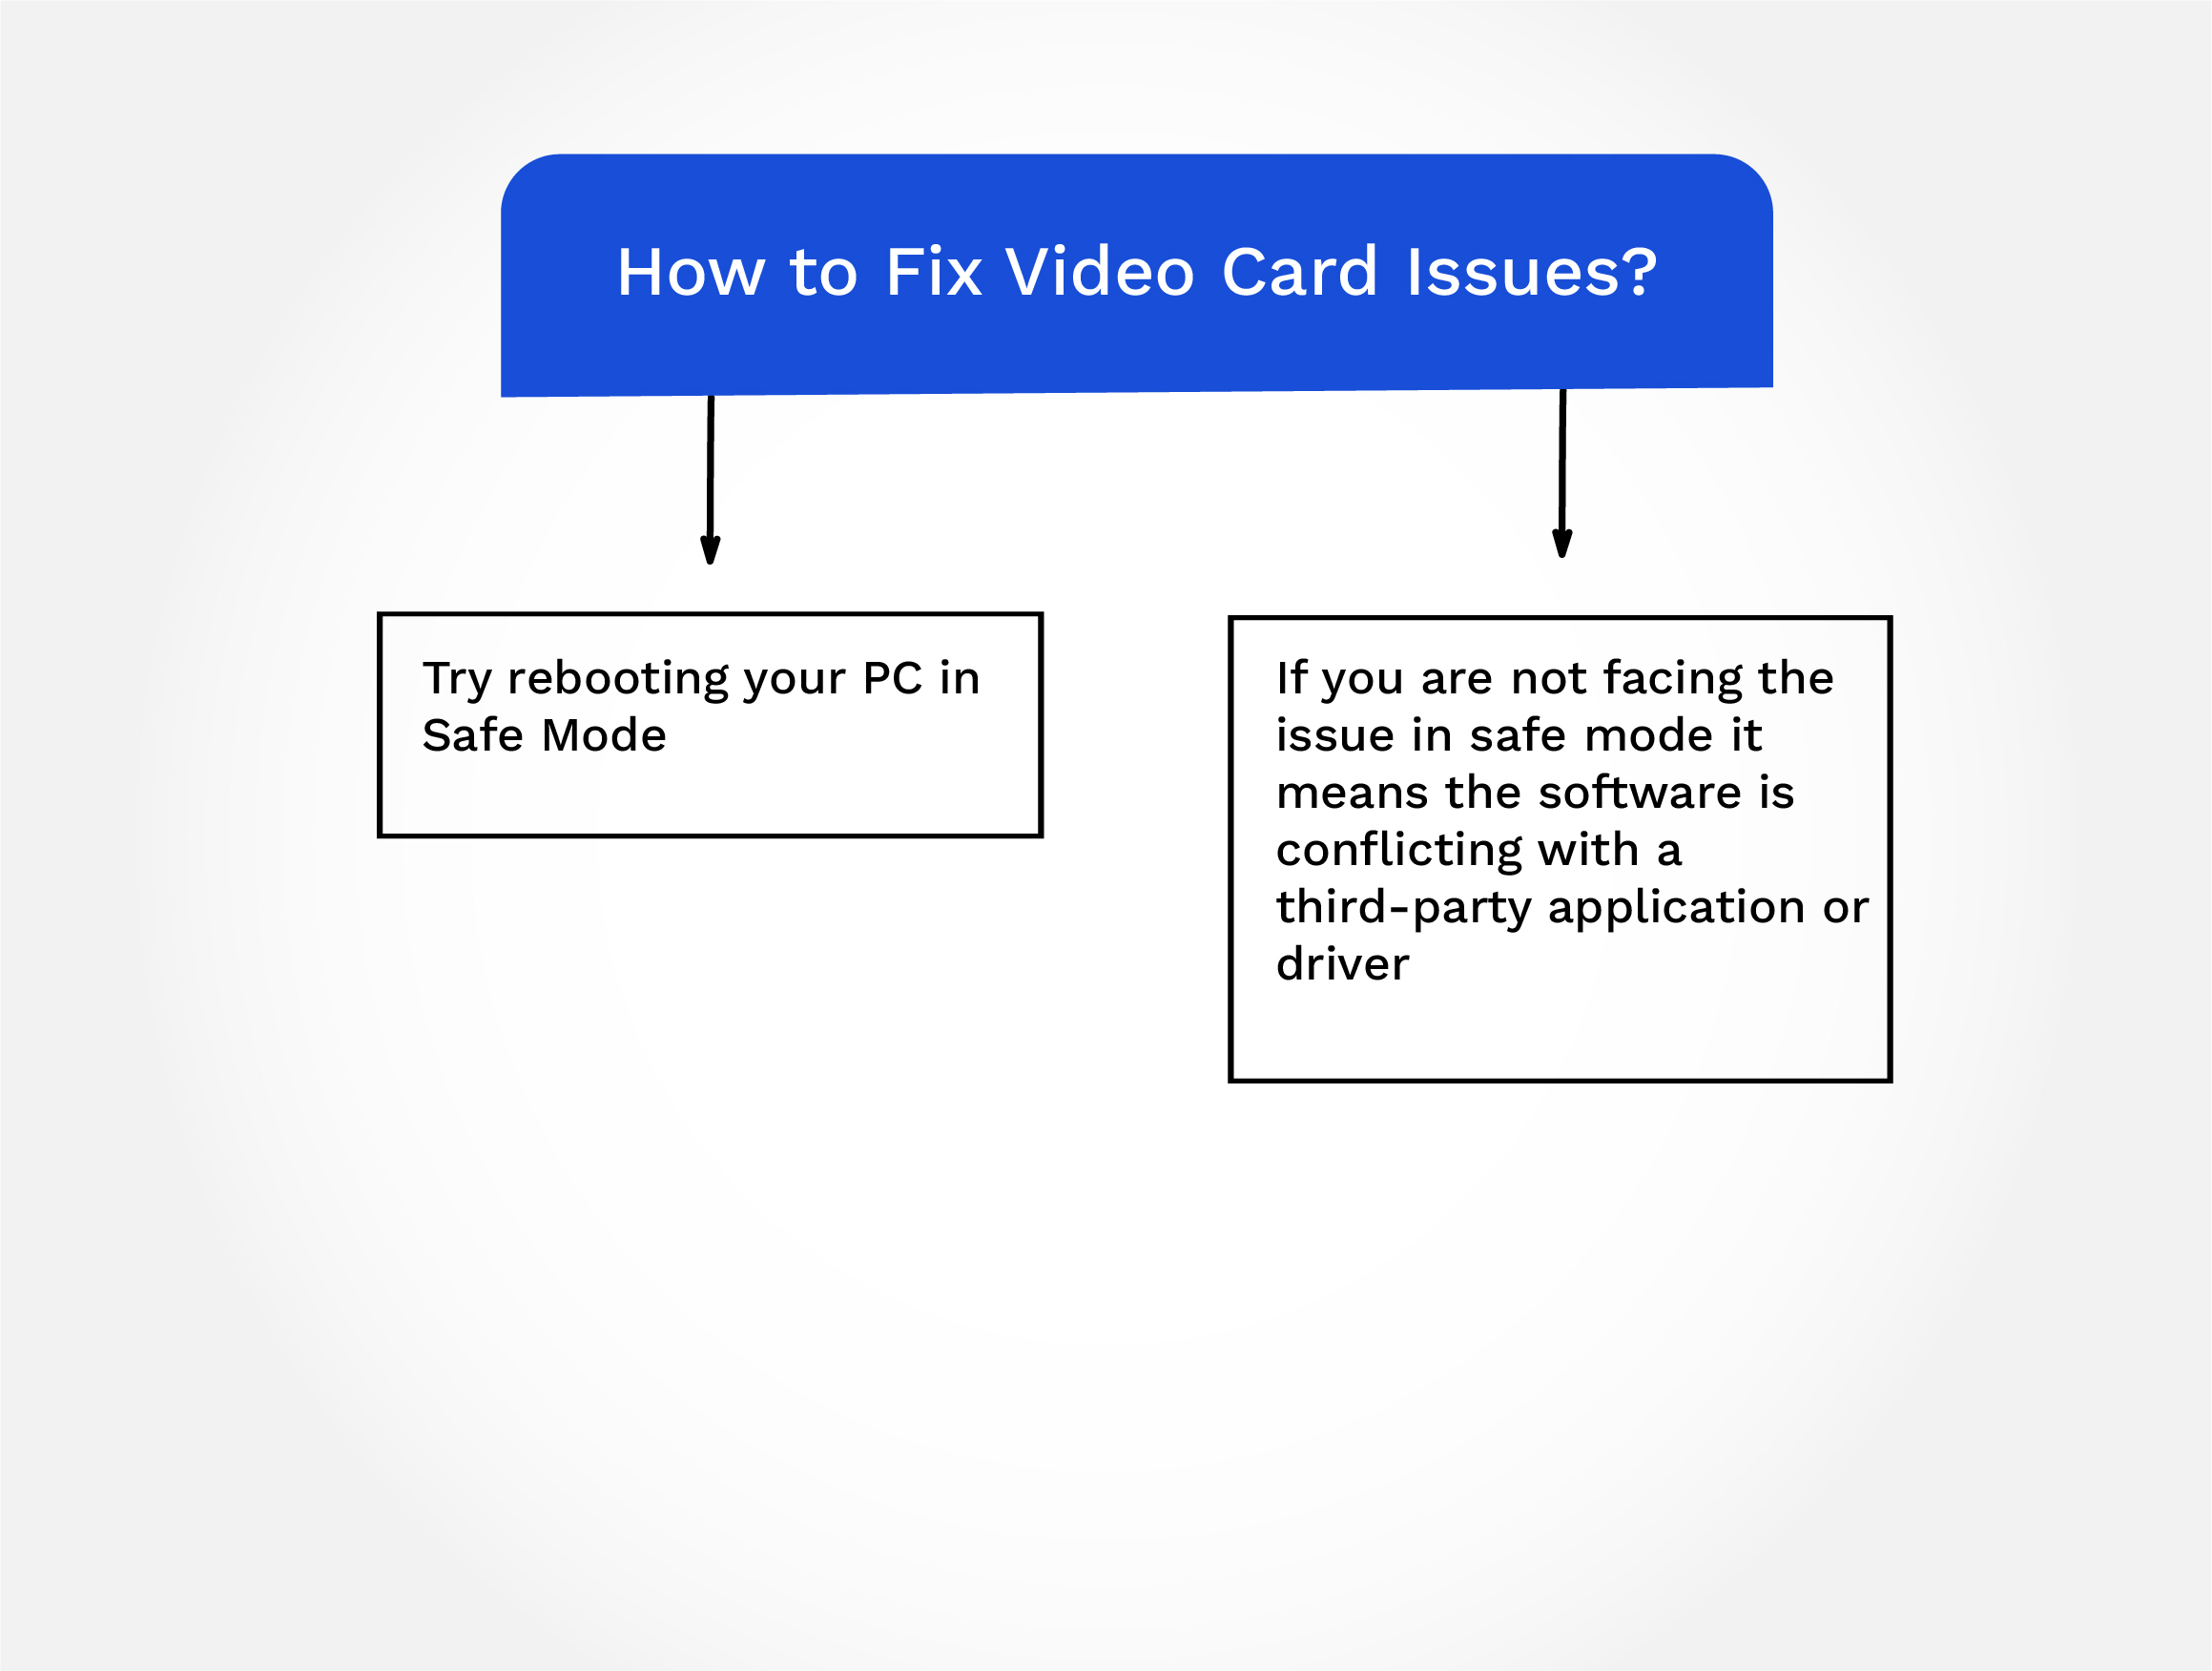 Fix Video Card Issues by Testing in Safe Mode